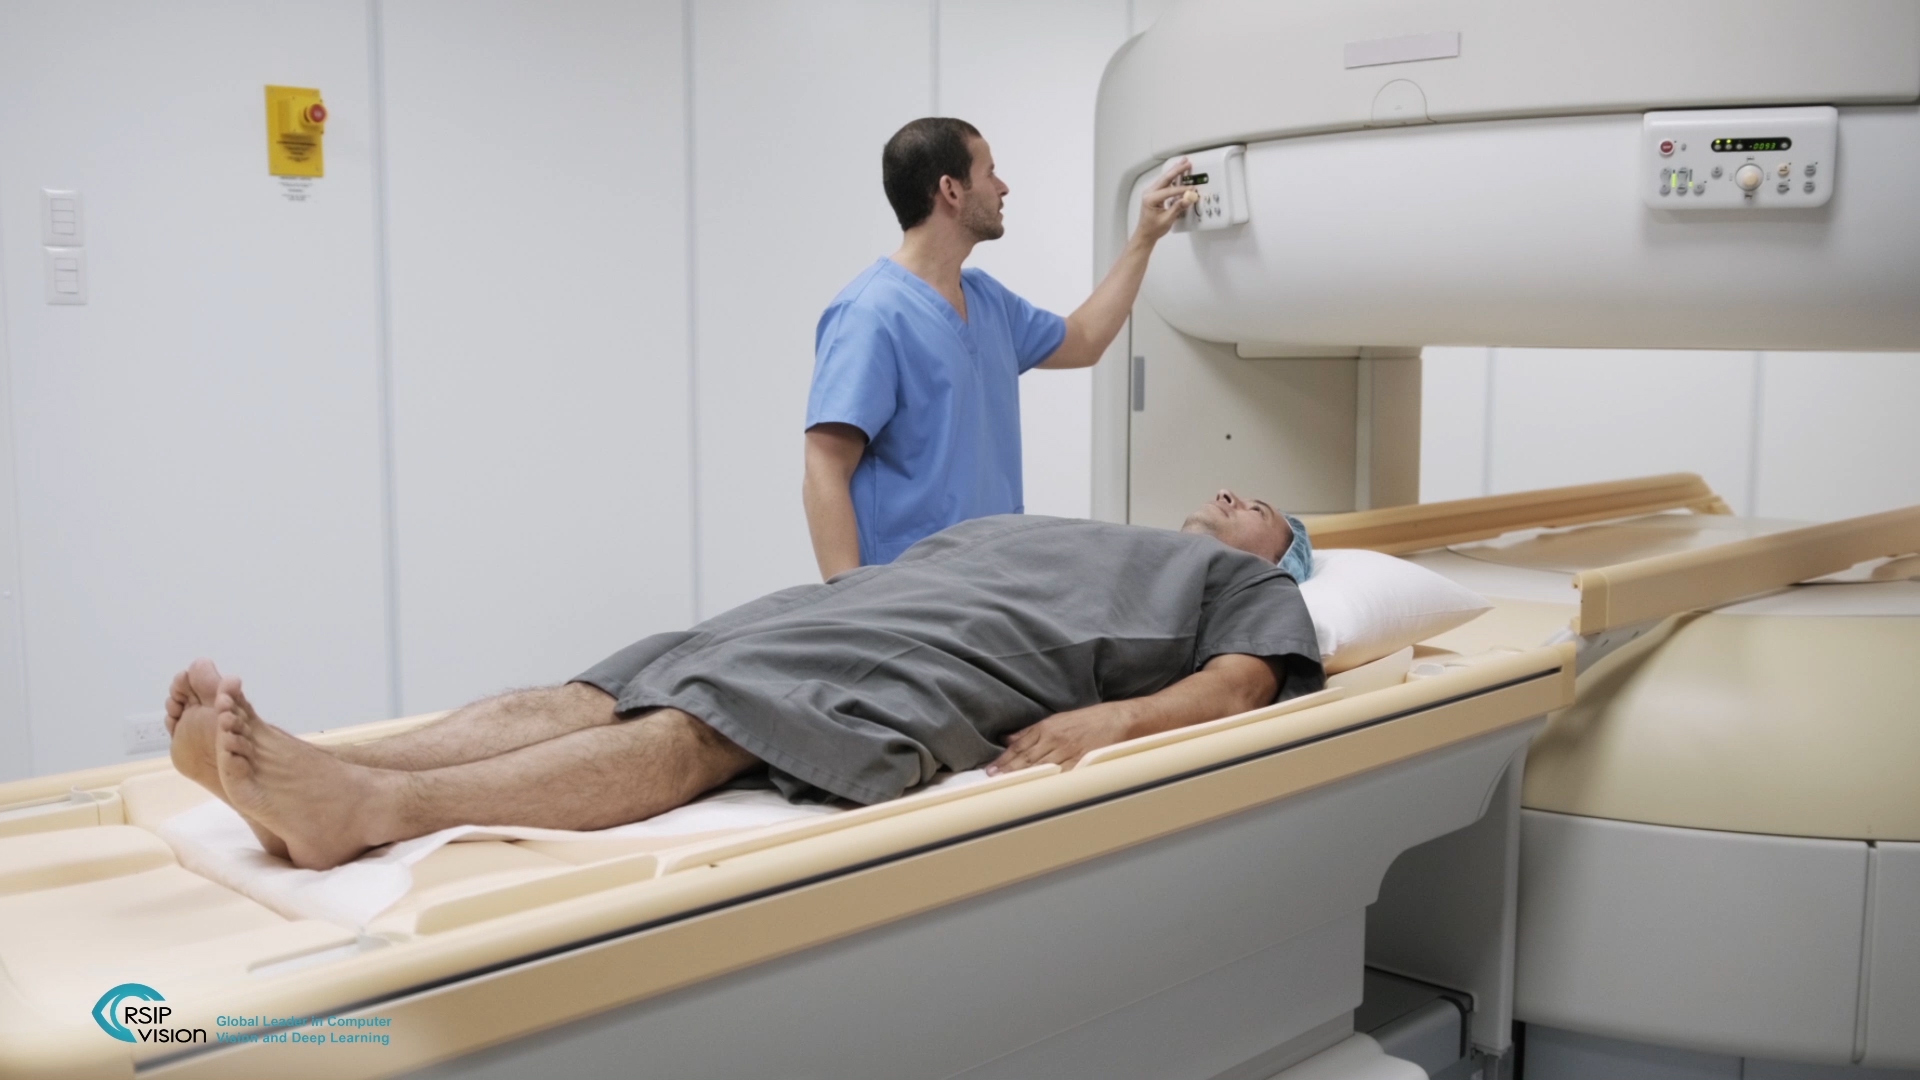 RSIP Vision's Advanced AI-Based Tool for Prostate MRI and Ultrasound Registration